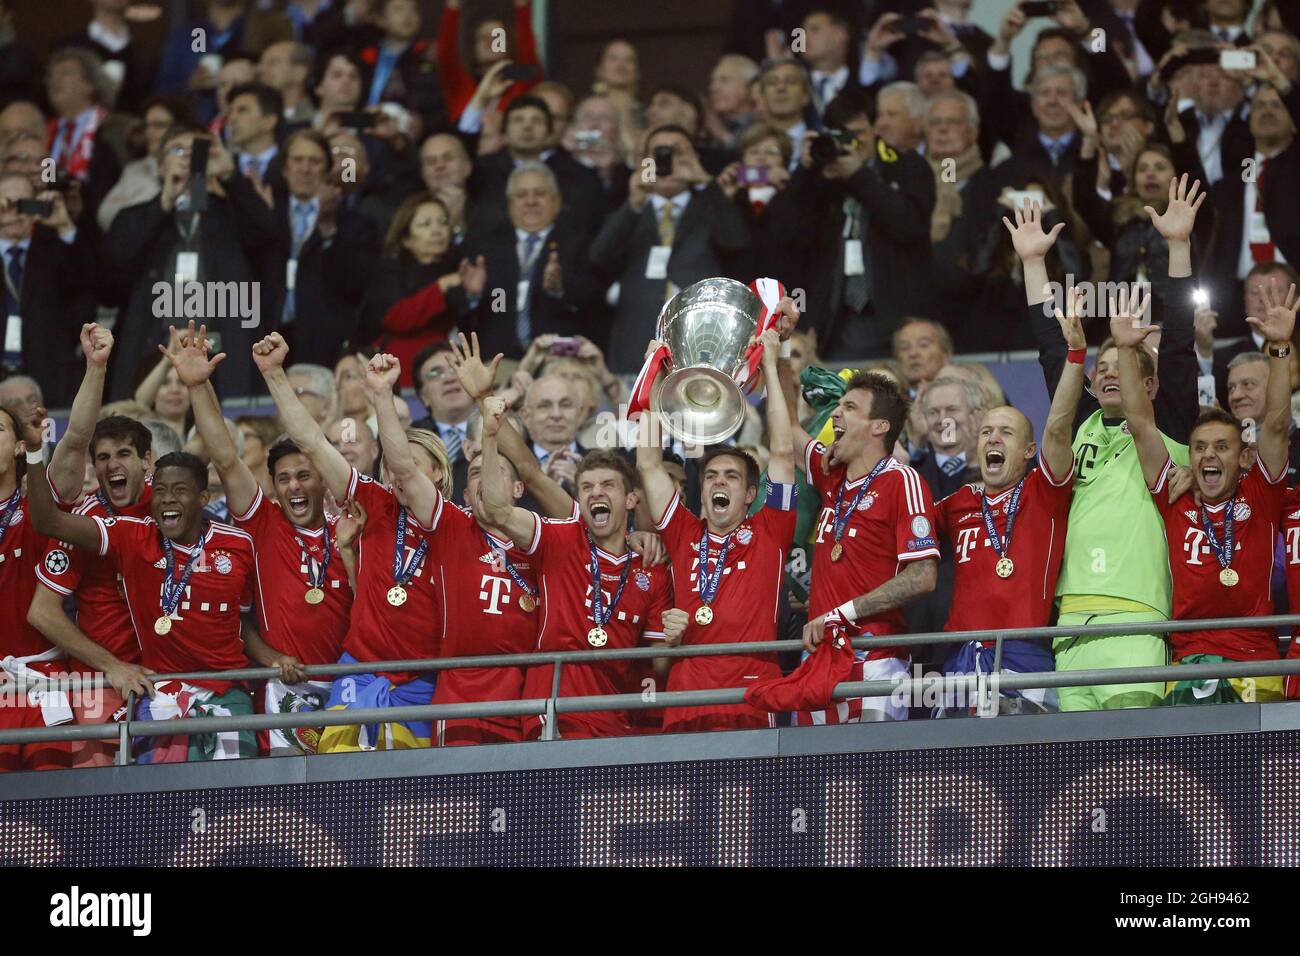 Munich's players celebrate with the trophy during the UEFA Champions  League, Final match between Borussia Dortmund and Bayern Munich at the  Wembley Stadium in London, United Kingdom on May 25, 2013. Pic